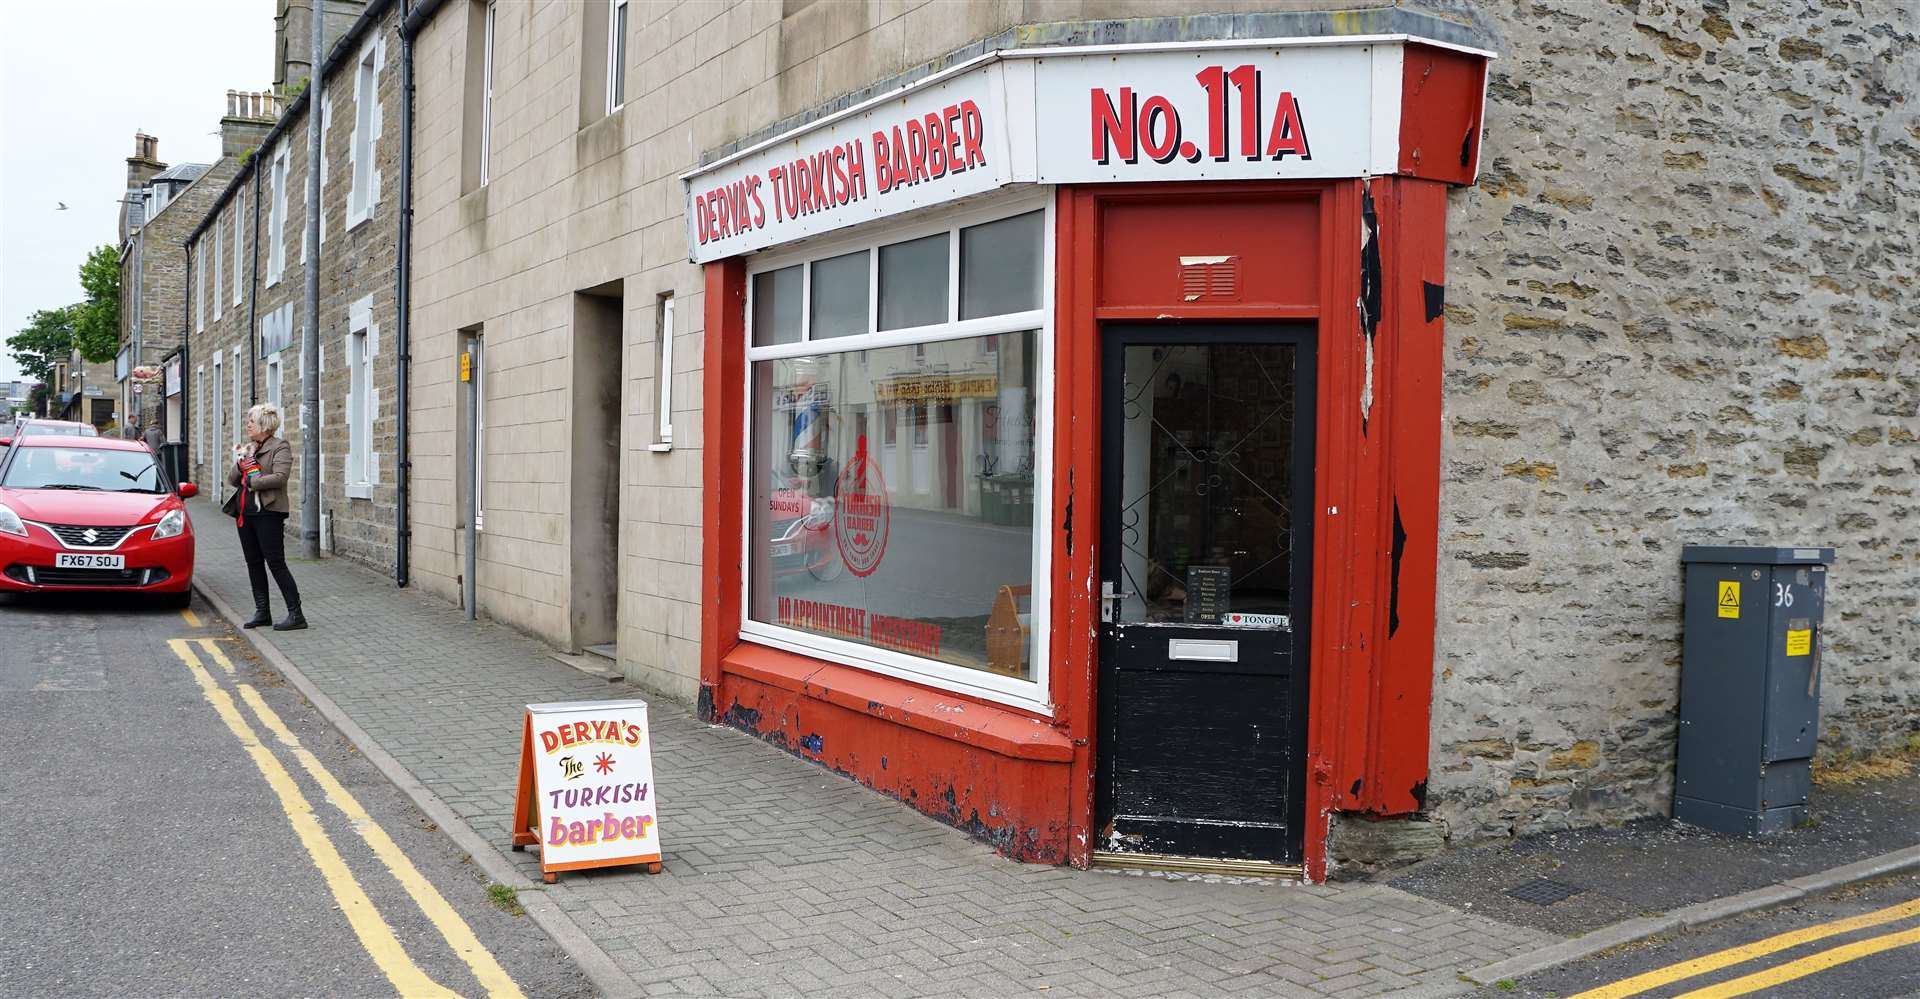 Derya's Turkish Barber shop in Thurso has many loyal customers who supported the appeal. Picture: DGS